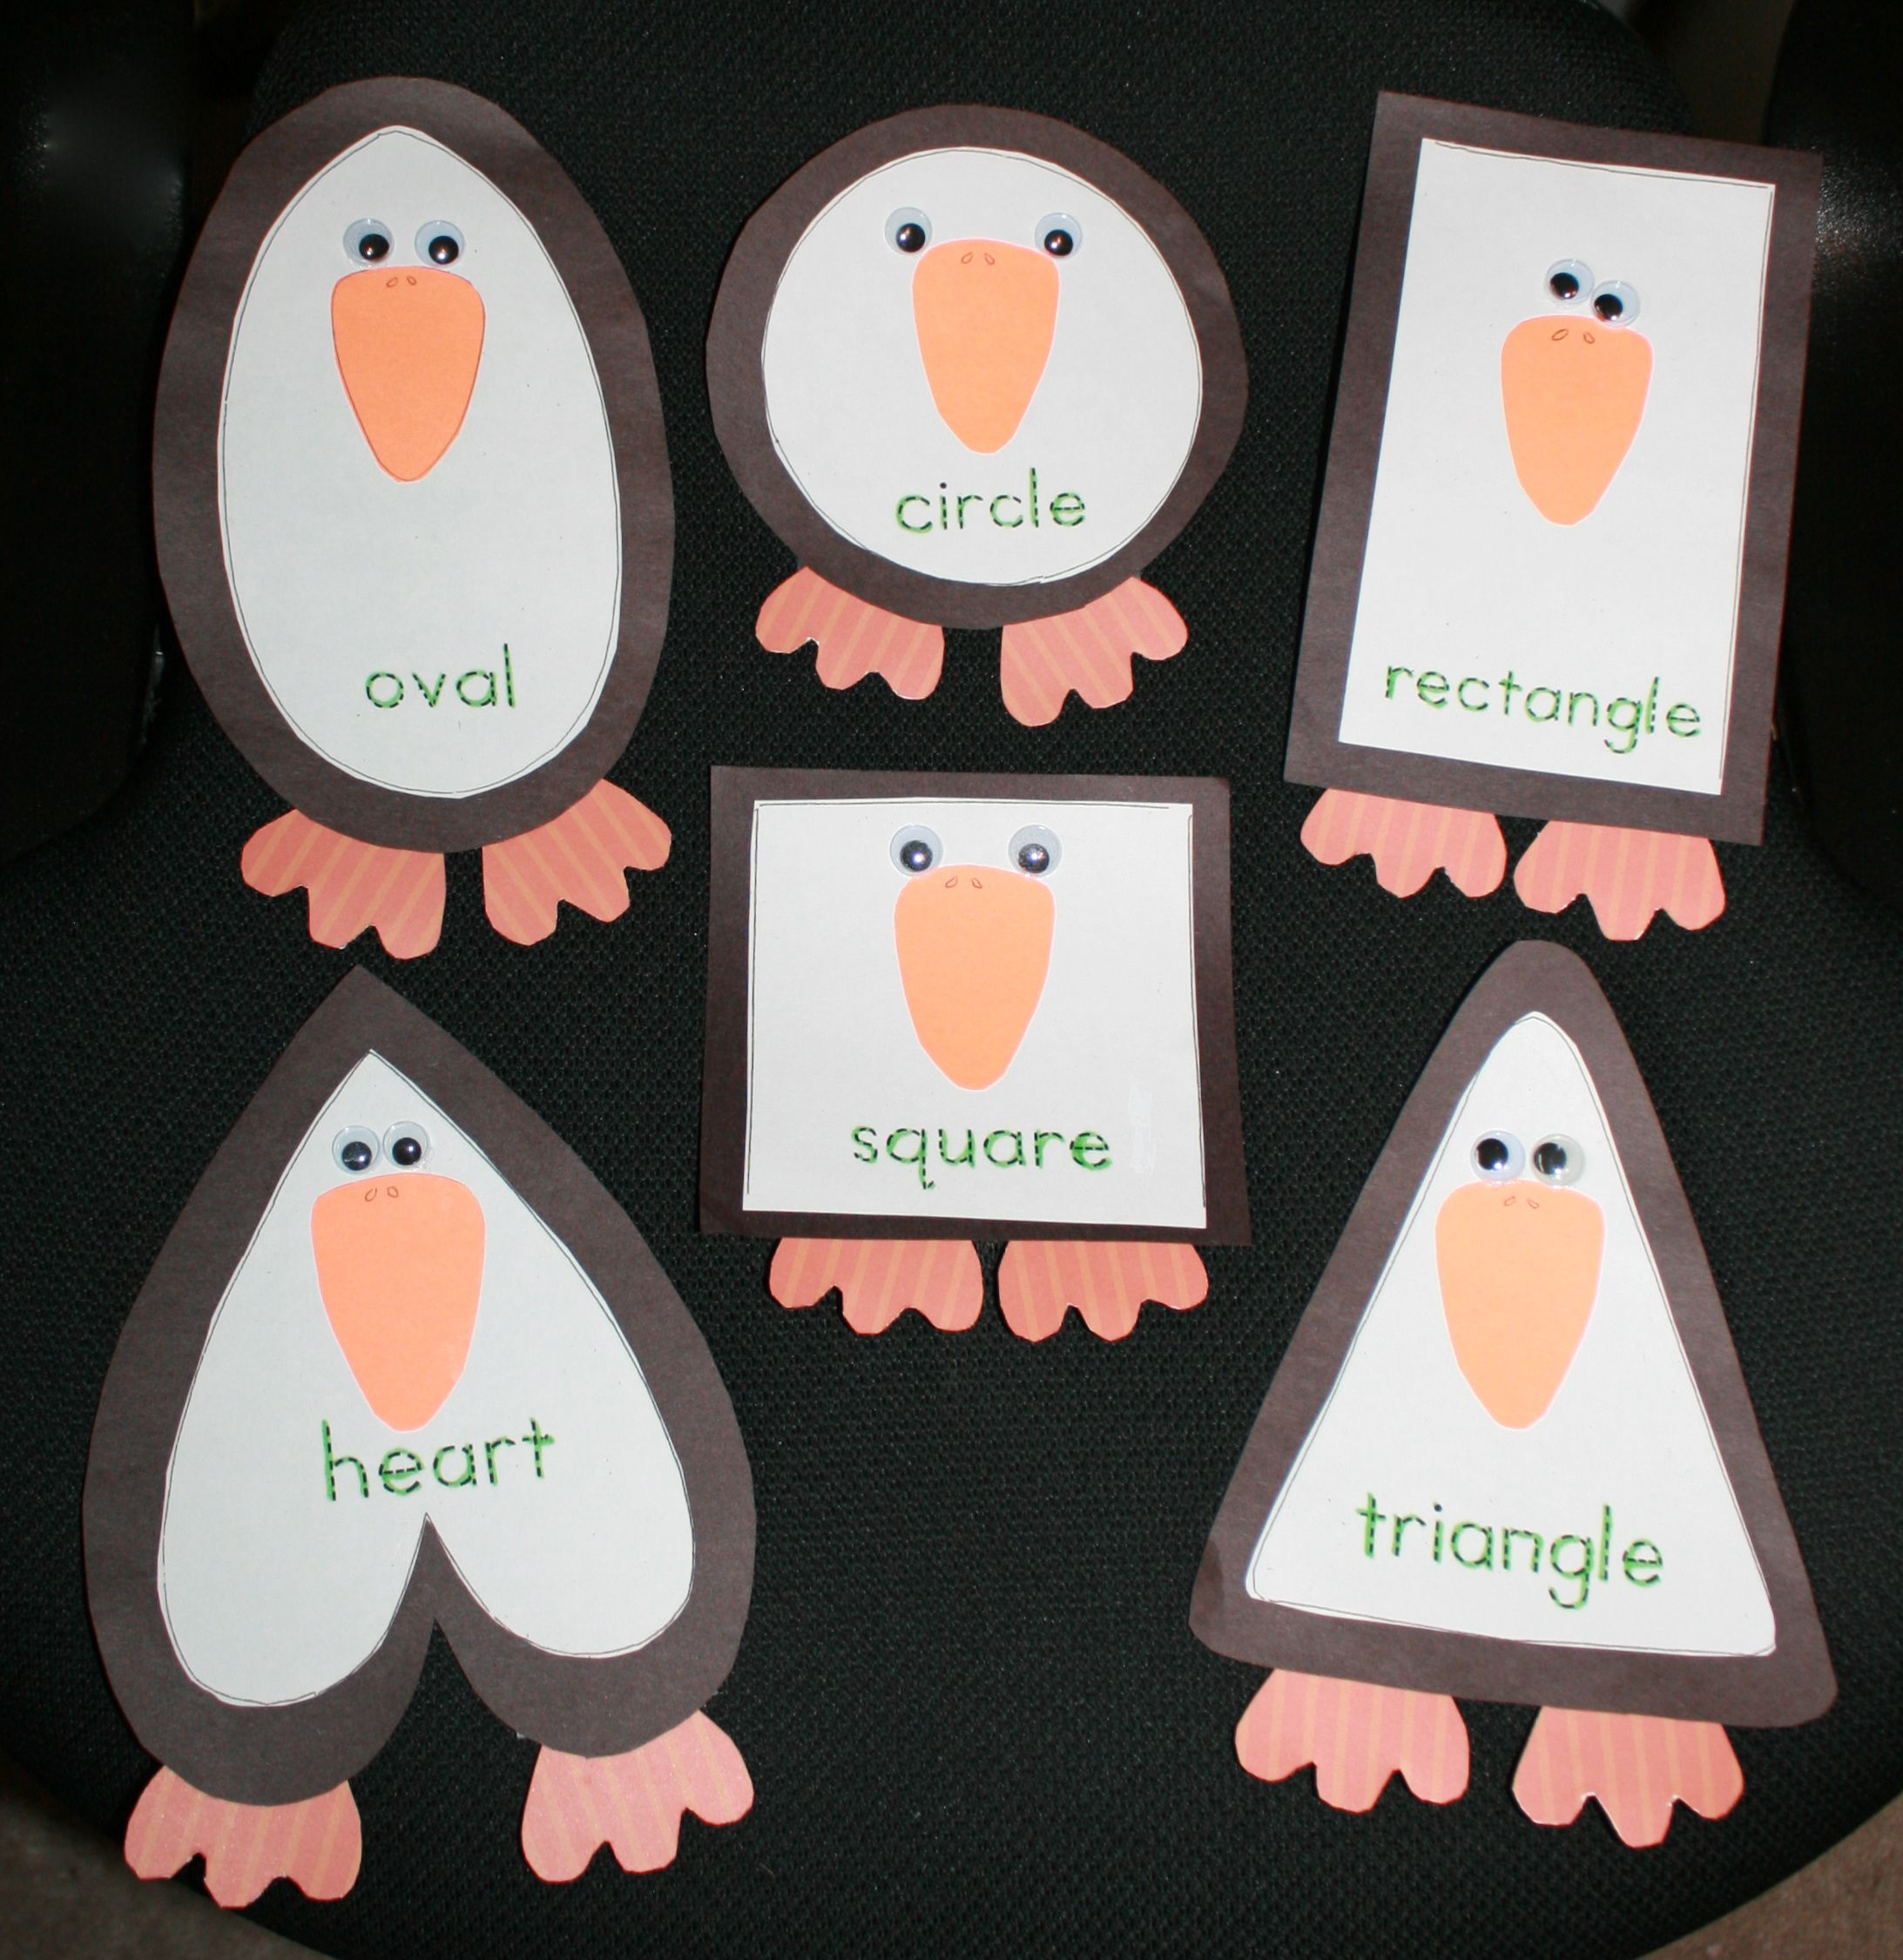 Studying Shapes With Penguins! | Preschool Crafts, Classroom